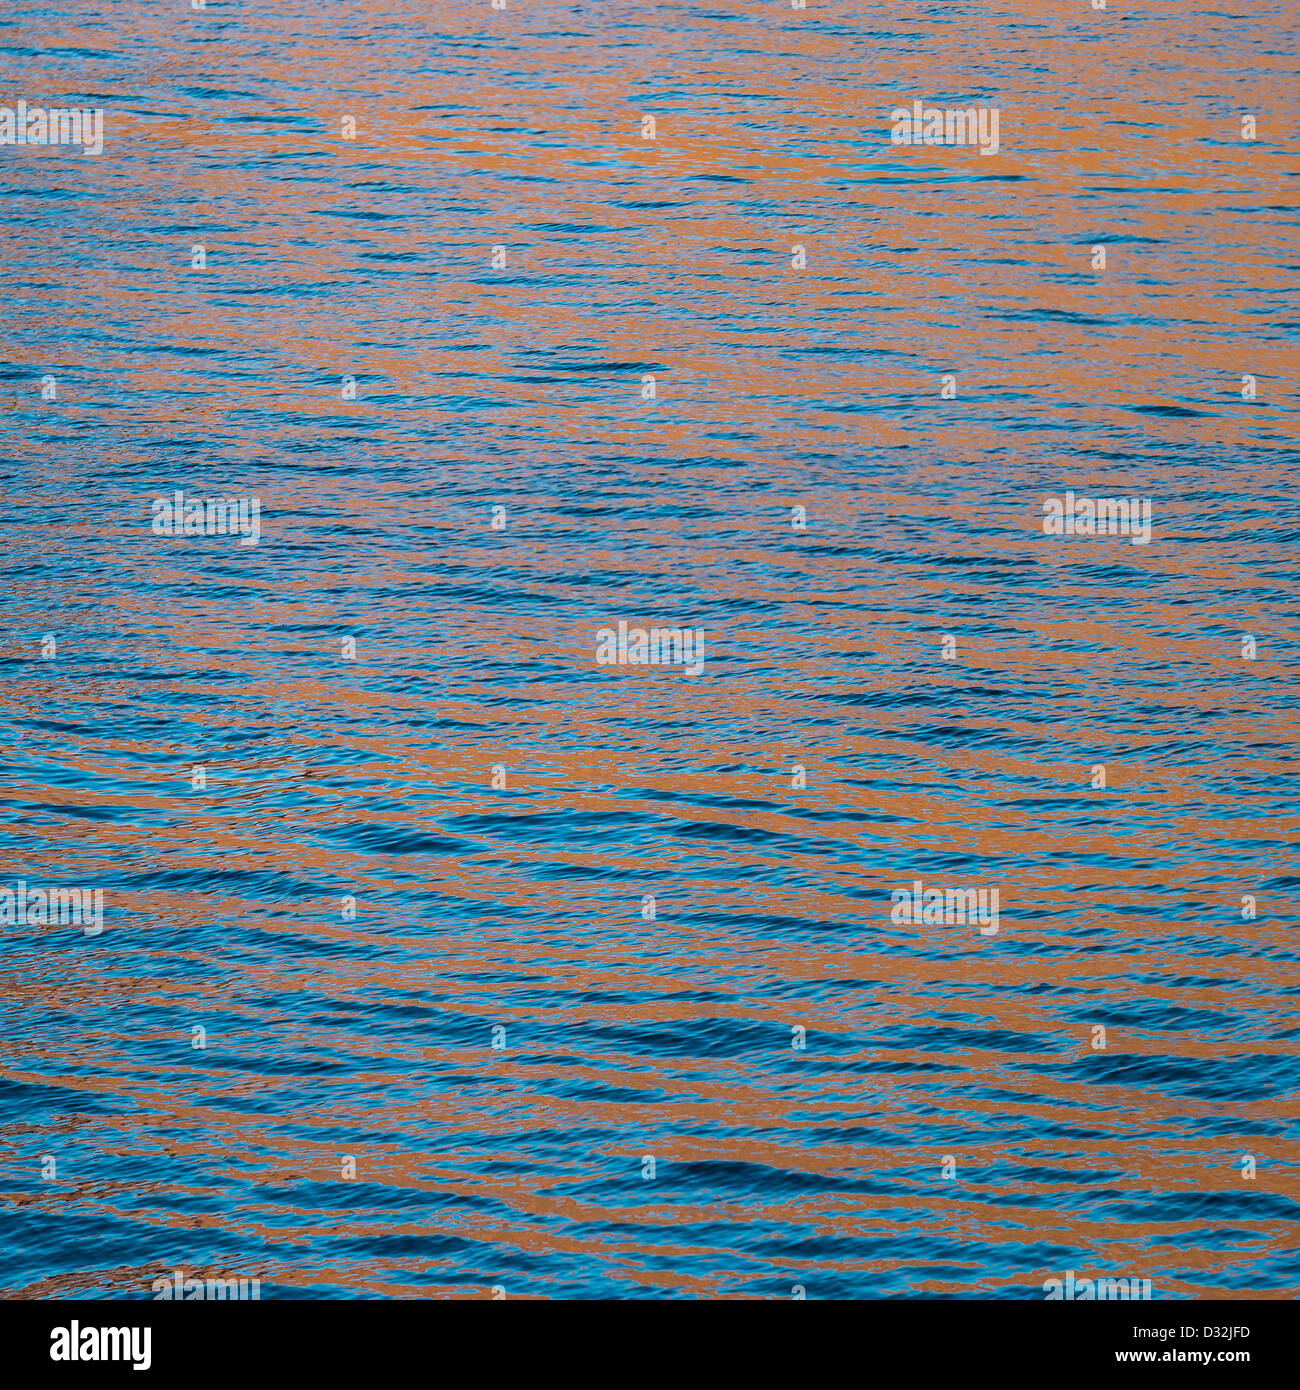 Ocean surface with ripples and patterns, Greenland Stock Photo